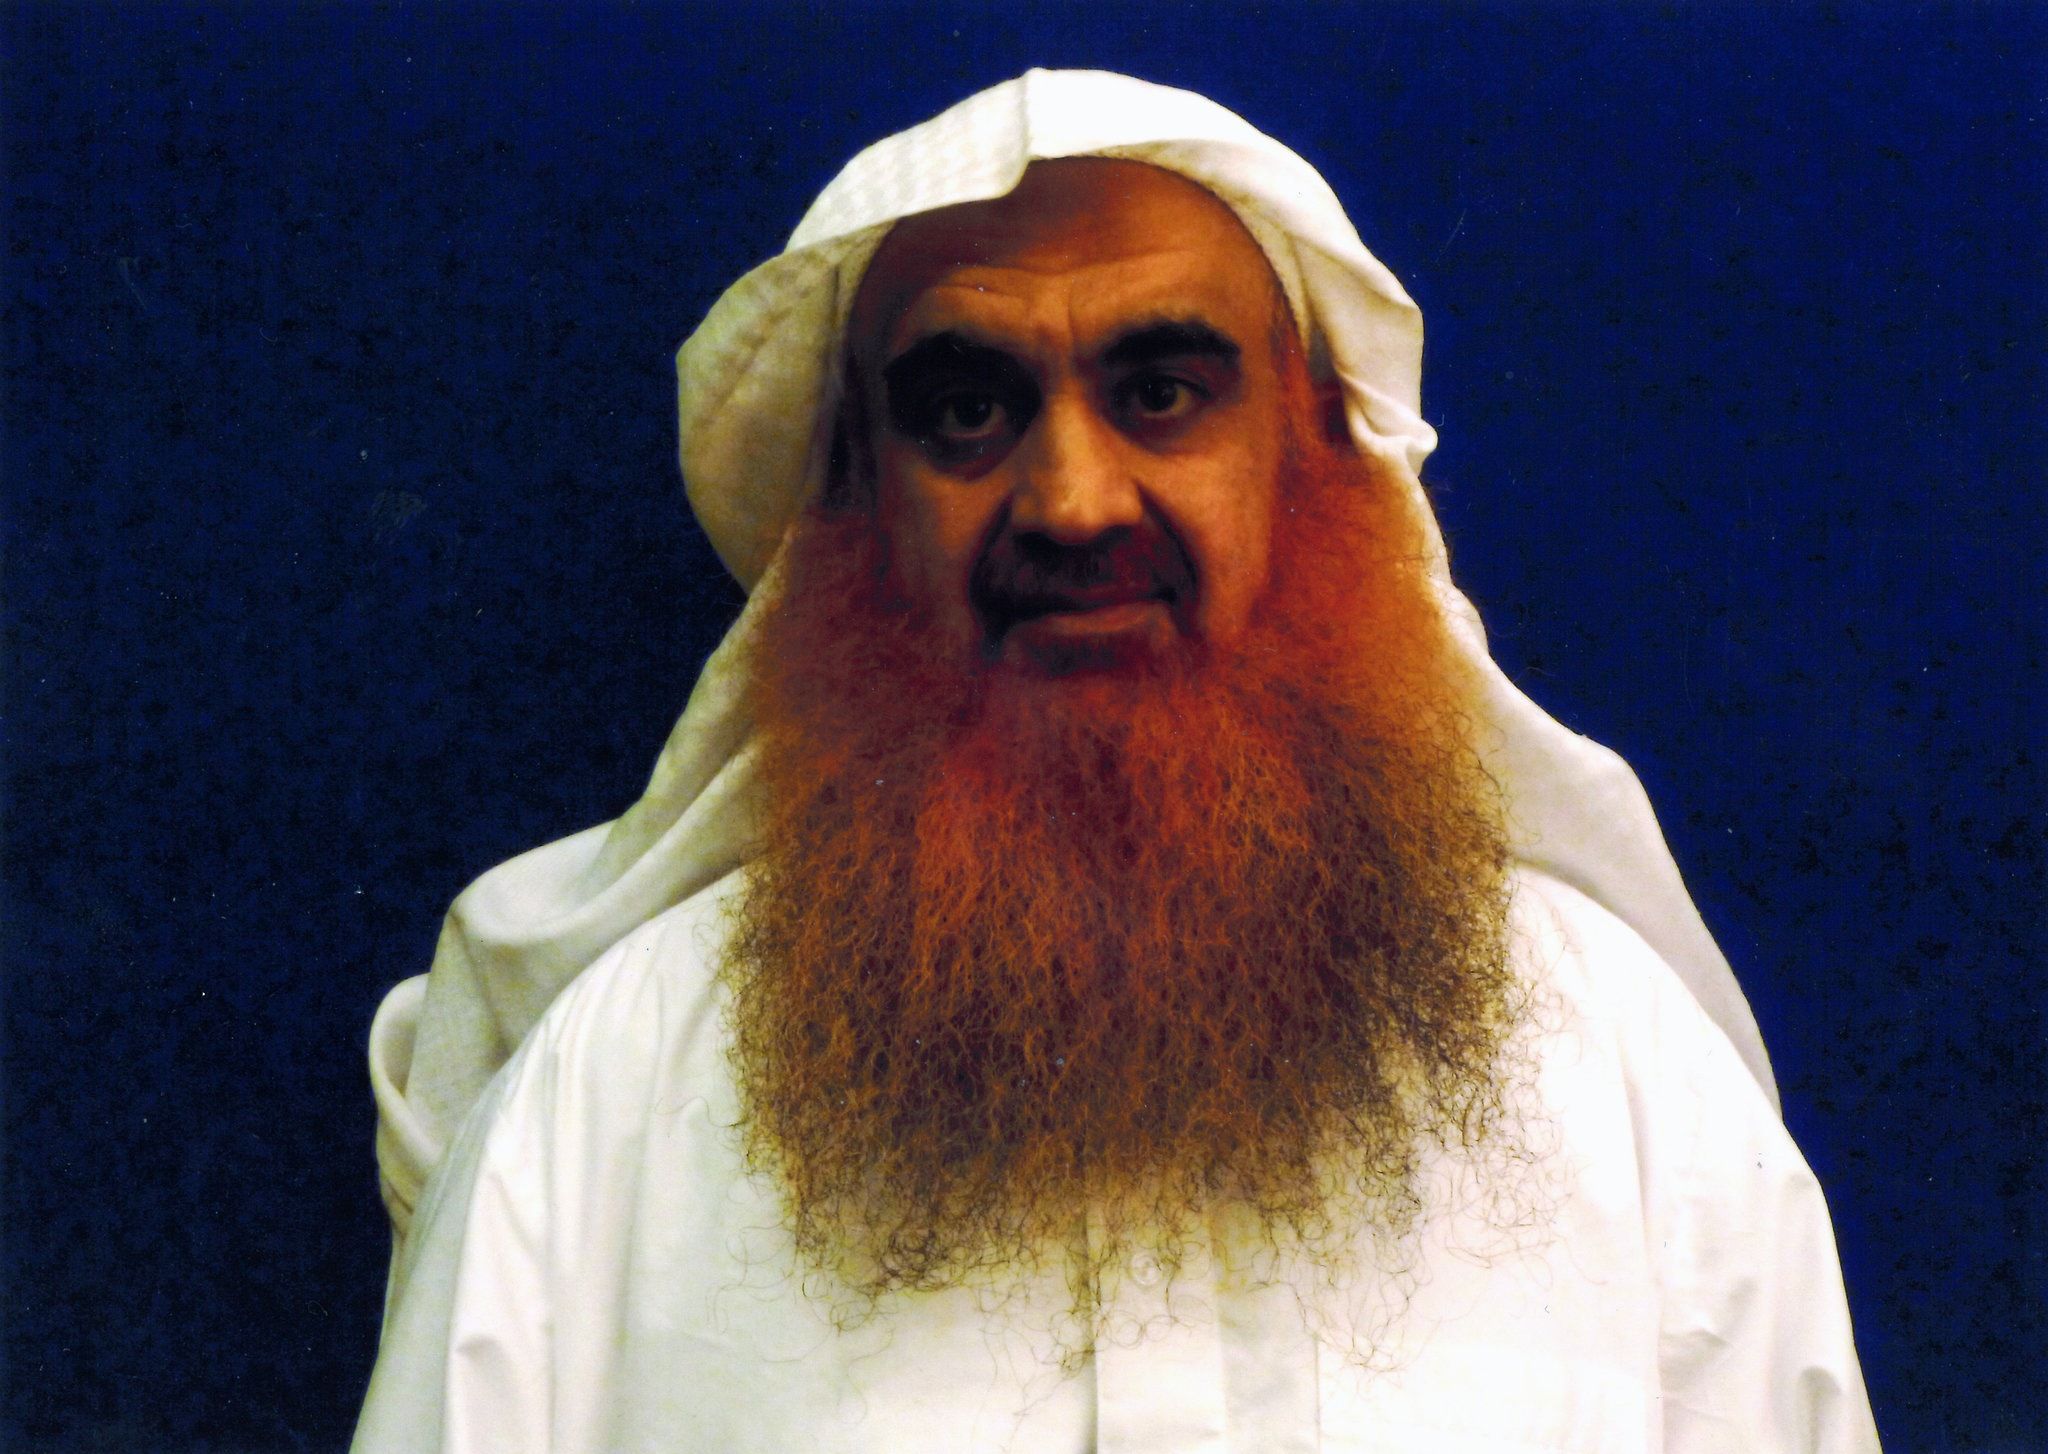 Khalid Shaikh Mohammed, who is accused of being the mastermind of the Sept. 11 attacks, in an image provided by his defense lawyers. United States, 2019.